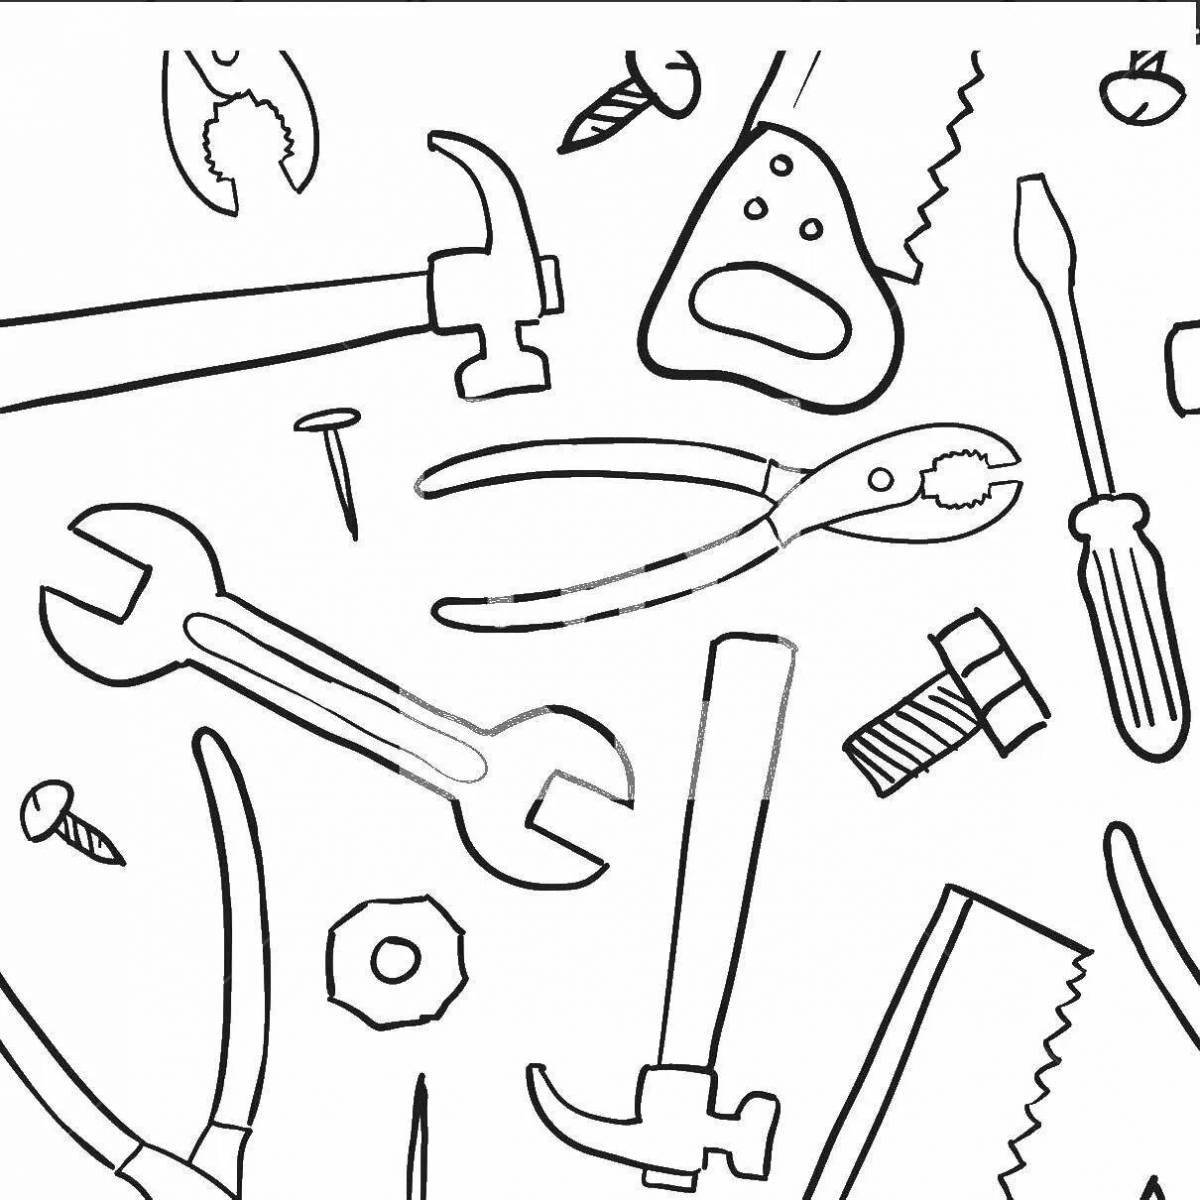 Fun tool coloring book for 4-5 year olds